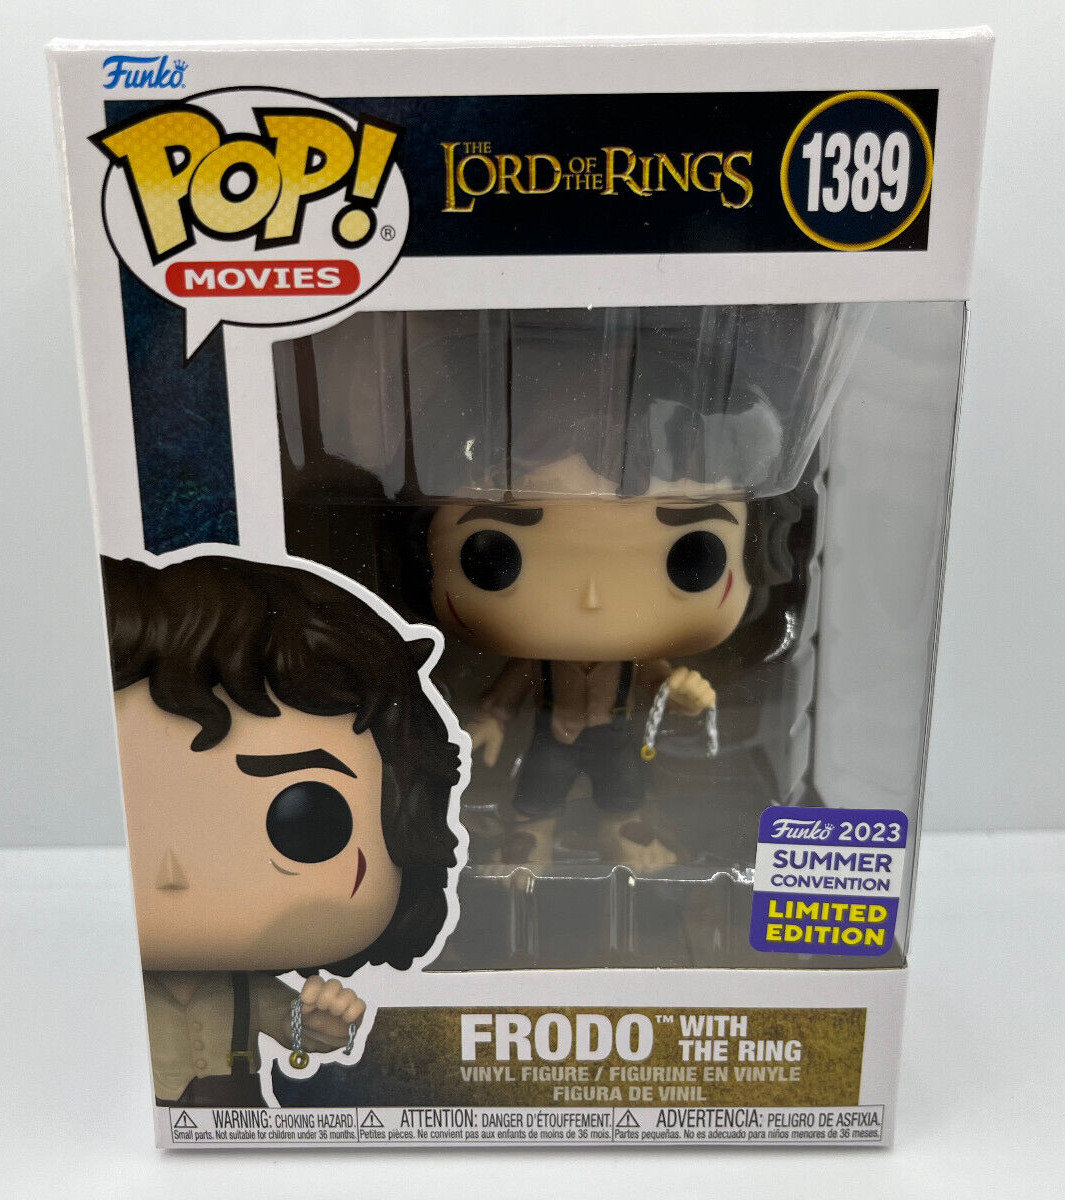 Funko Pop The Lord of the Rings - Frodo with the Ring (2023 Summer) #1389